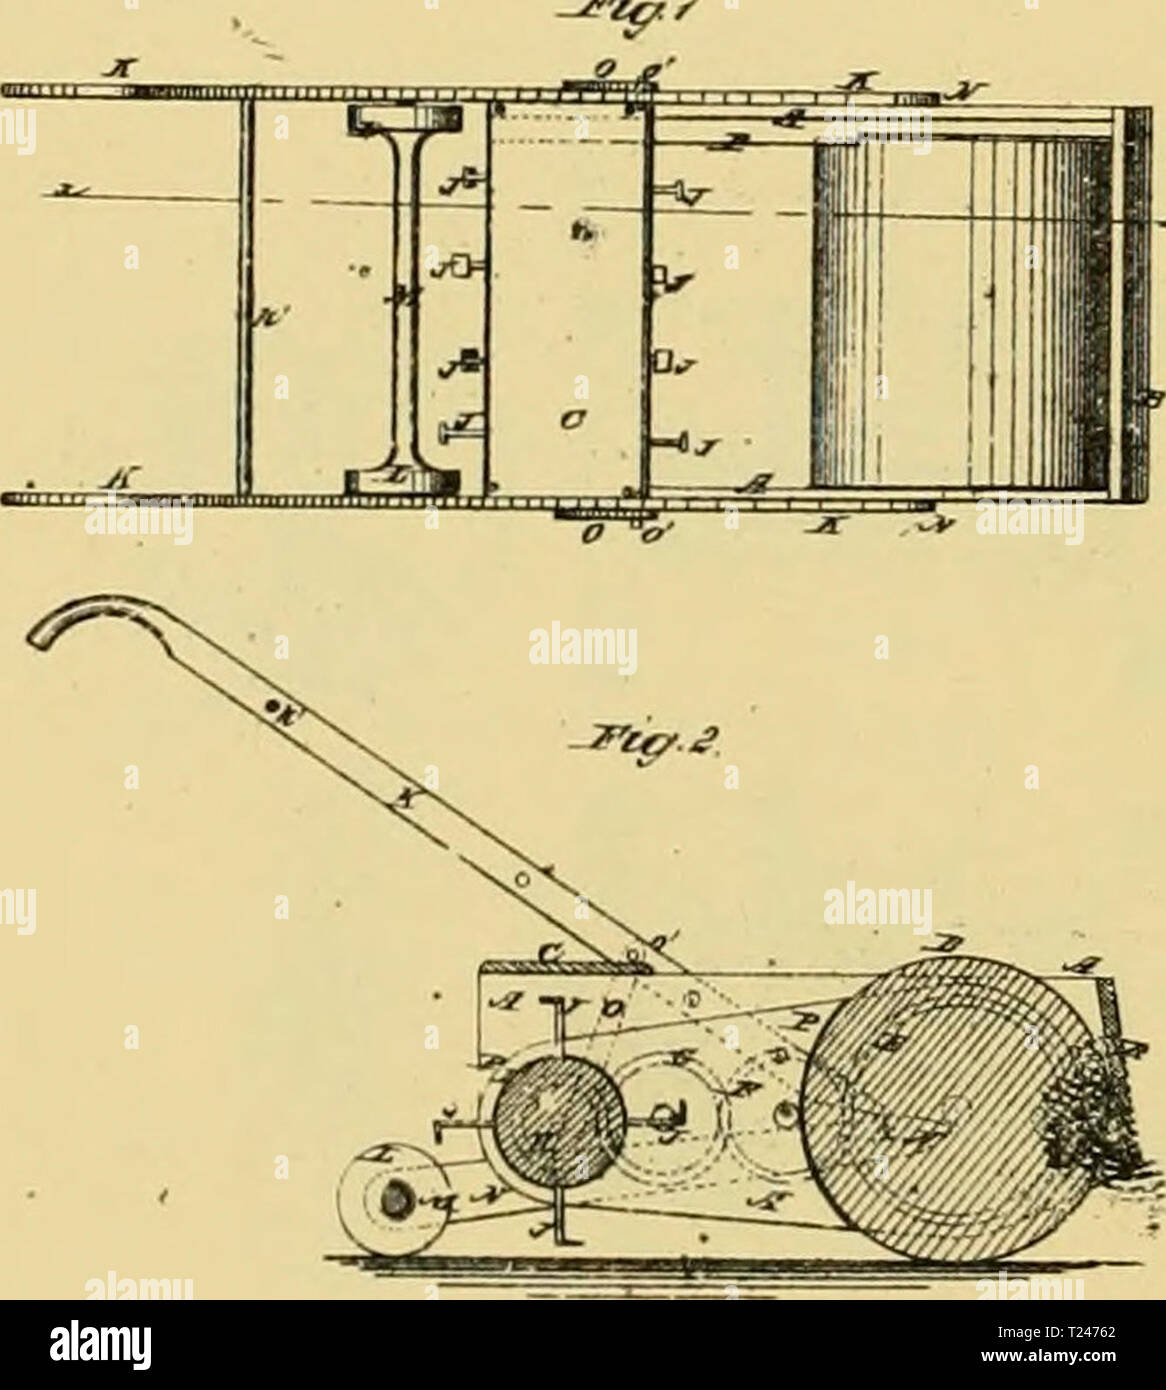 Archive image from page 313 of Digest of agricultural implements, patented Digest of agricultural implements, patented in the United States from A.D. 1789 to July 1881 ..  digestofagricult02alle Year: 1886  S. B. SBEKHiN. It570L7IHO GAKSZa ASD F1EJ.D BOB. Ho. 1S1.870. Flliiul Sigt. 5, 2Shists-Slieet 1. W. UcC. KAIBES. COUBiVED SFADino. FL0WIS7 AHD STALE-CUTTIVO SACSnS. No. 181,959. FiUattd Sopt. S, 1876.    riiffJ .&gt;?««« Stock Photo